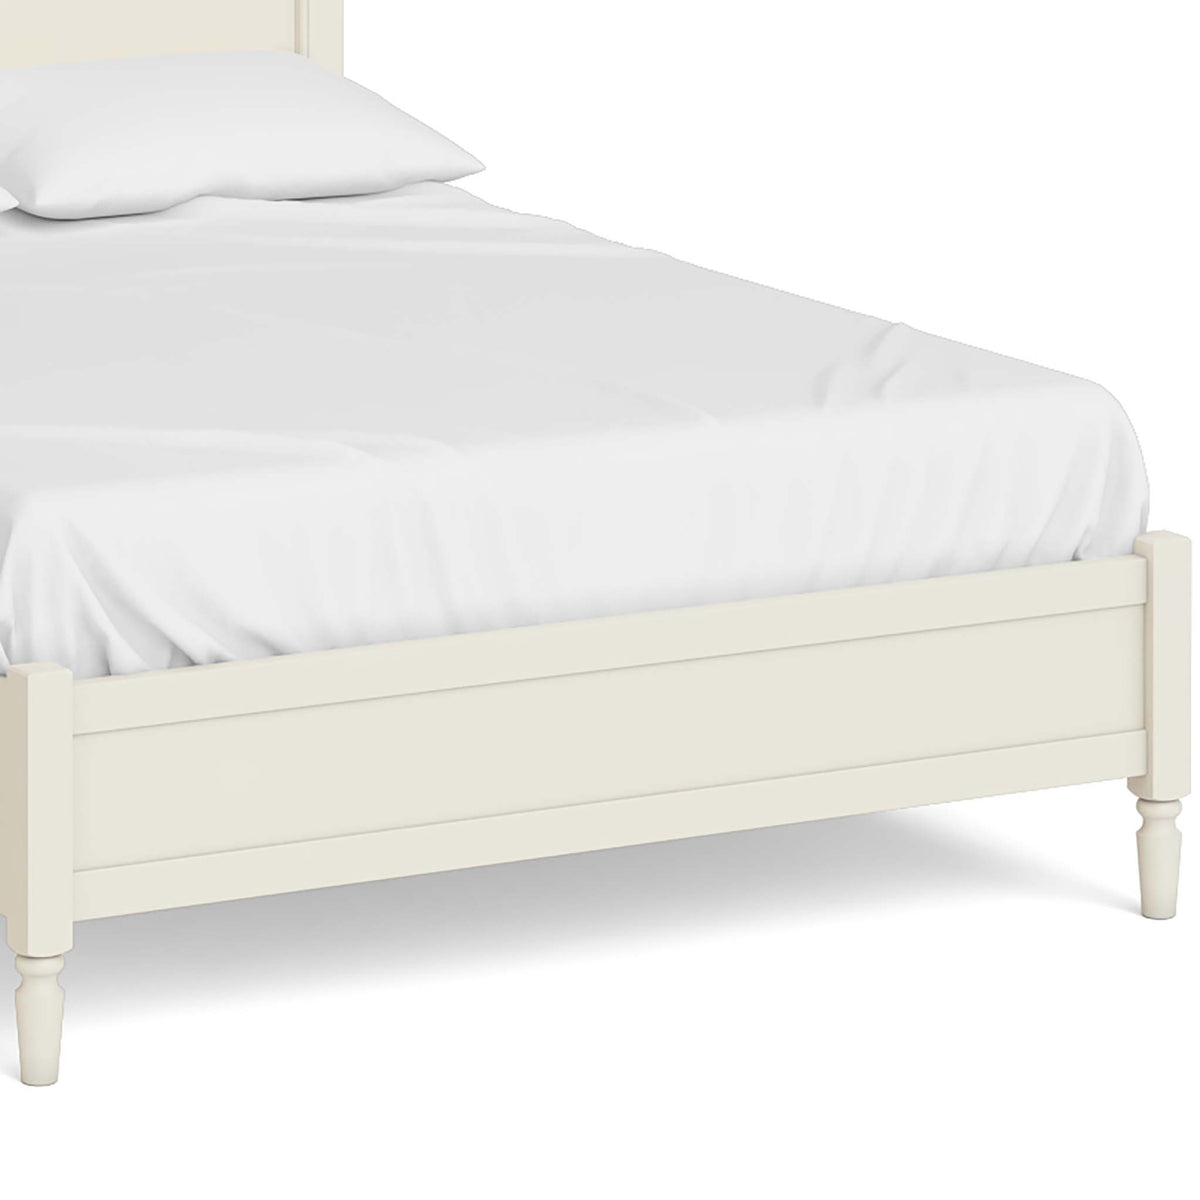 The Muslanne Cream 4'6" Double Bed Frame - Close Up of Base of Bed